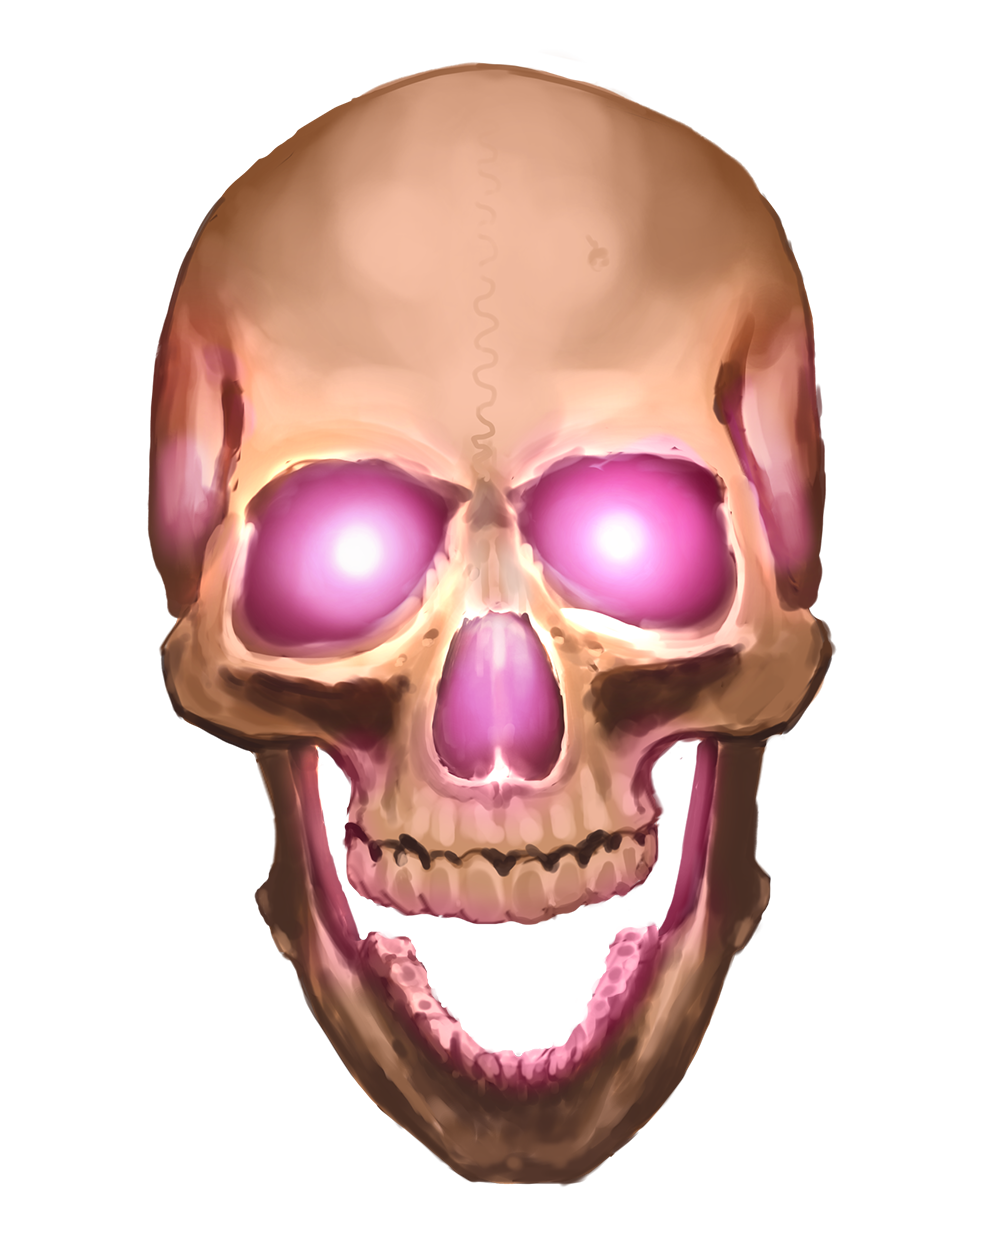 Illustration by Josef Kucera: A human skull with glowing pink eyes and her mouth open